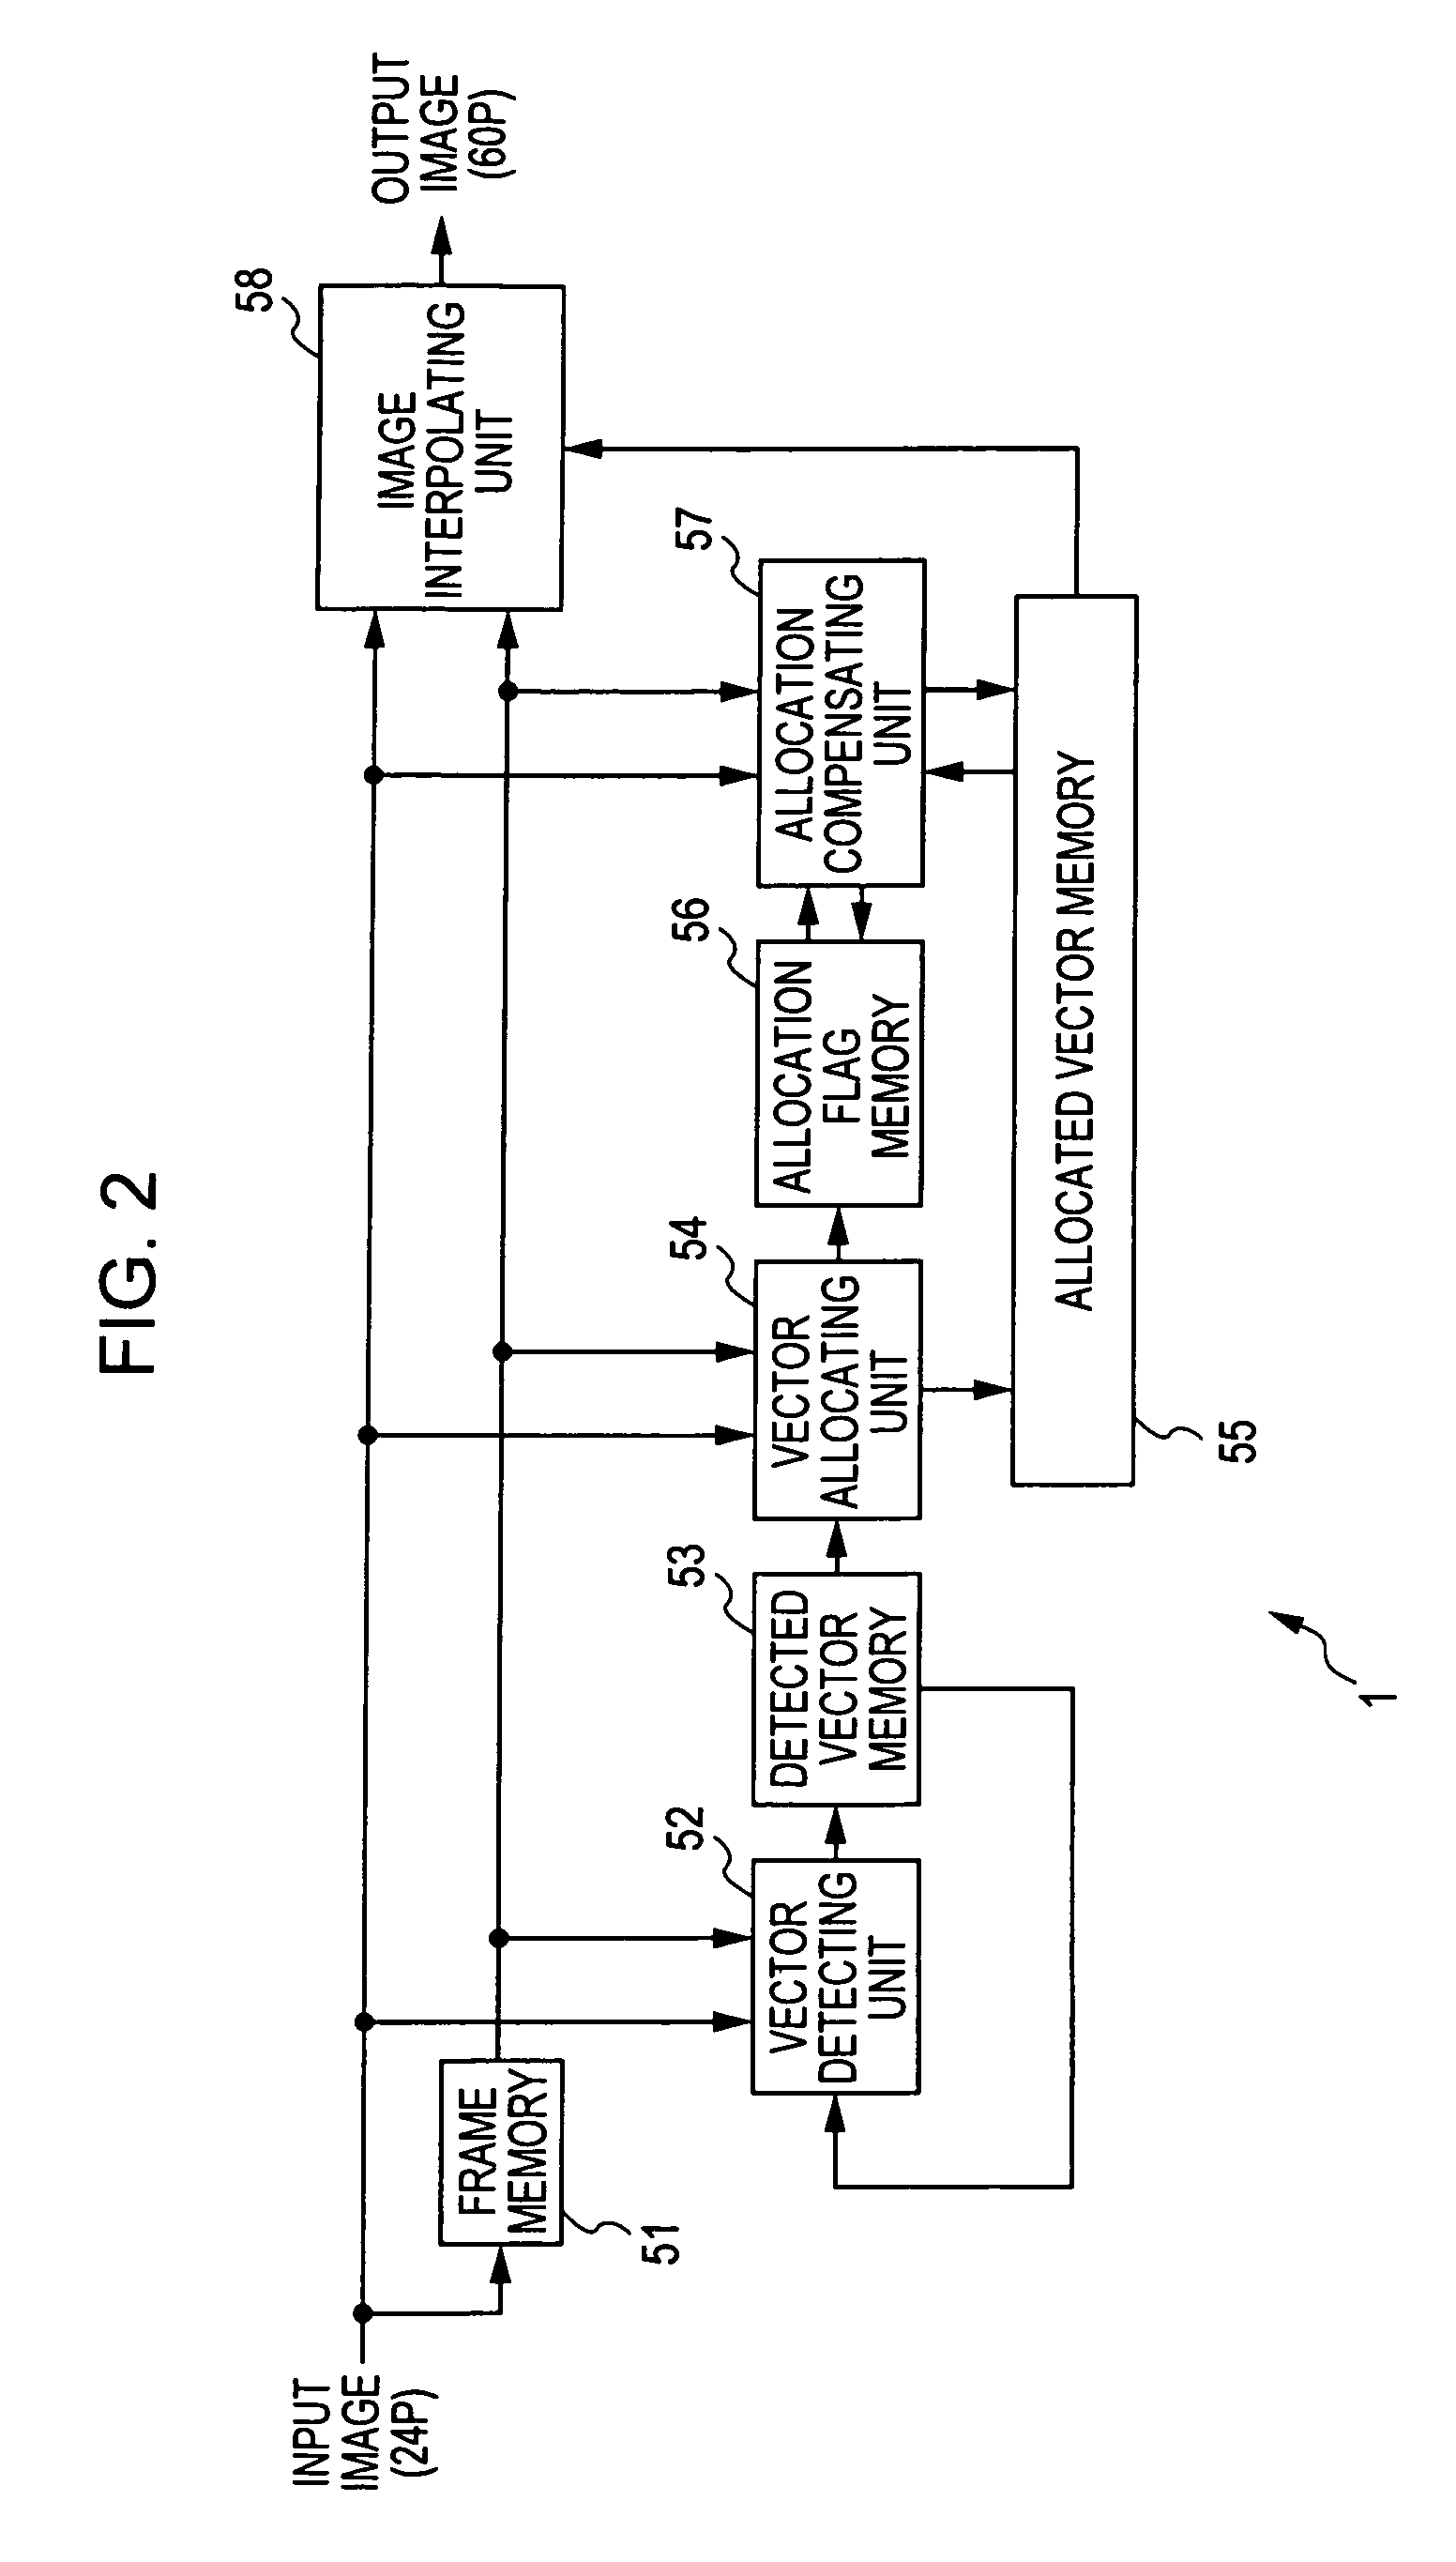 Image processing apparatus and method, and recording medium and program used therewith